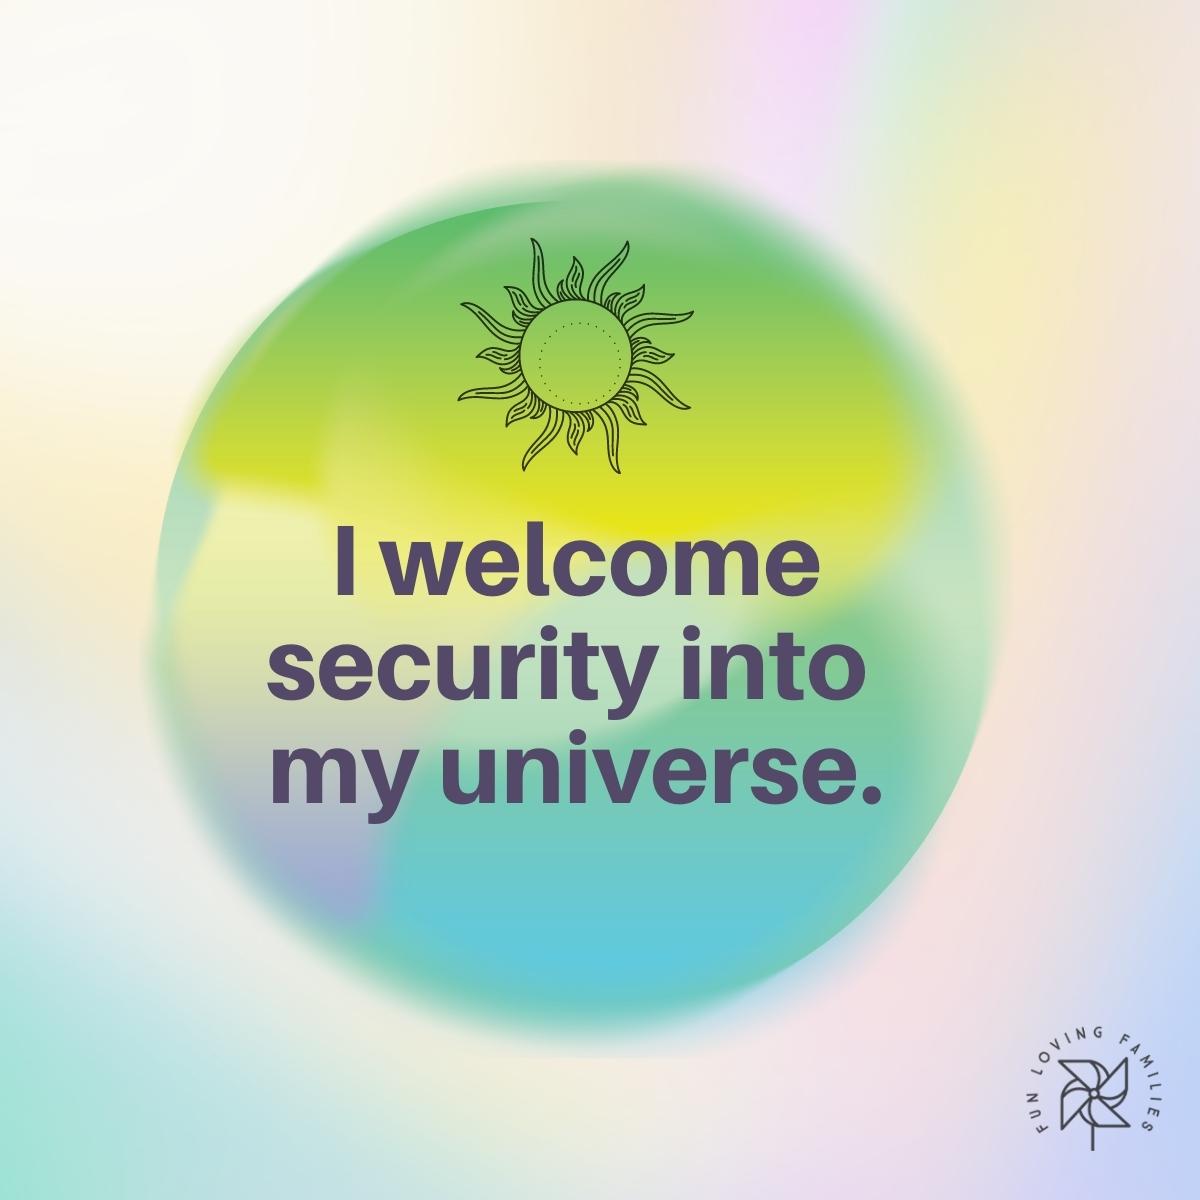 I welcome security into my universe affirmations